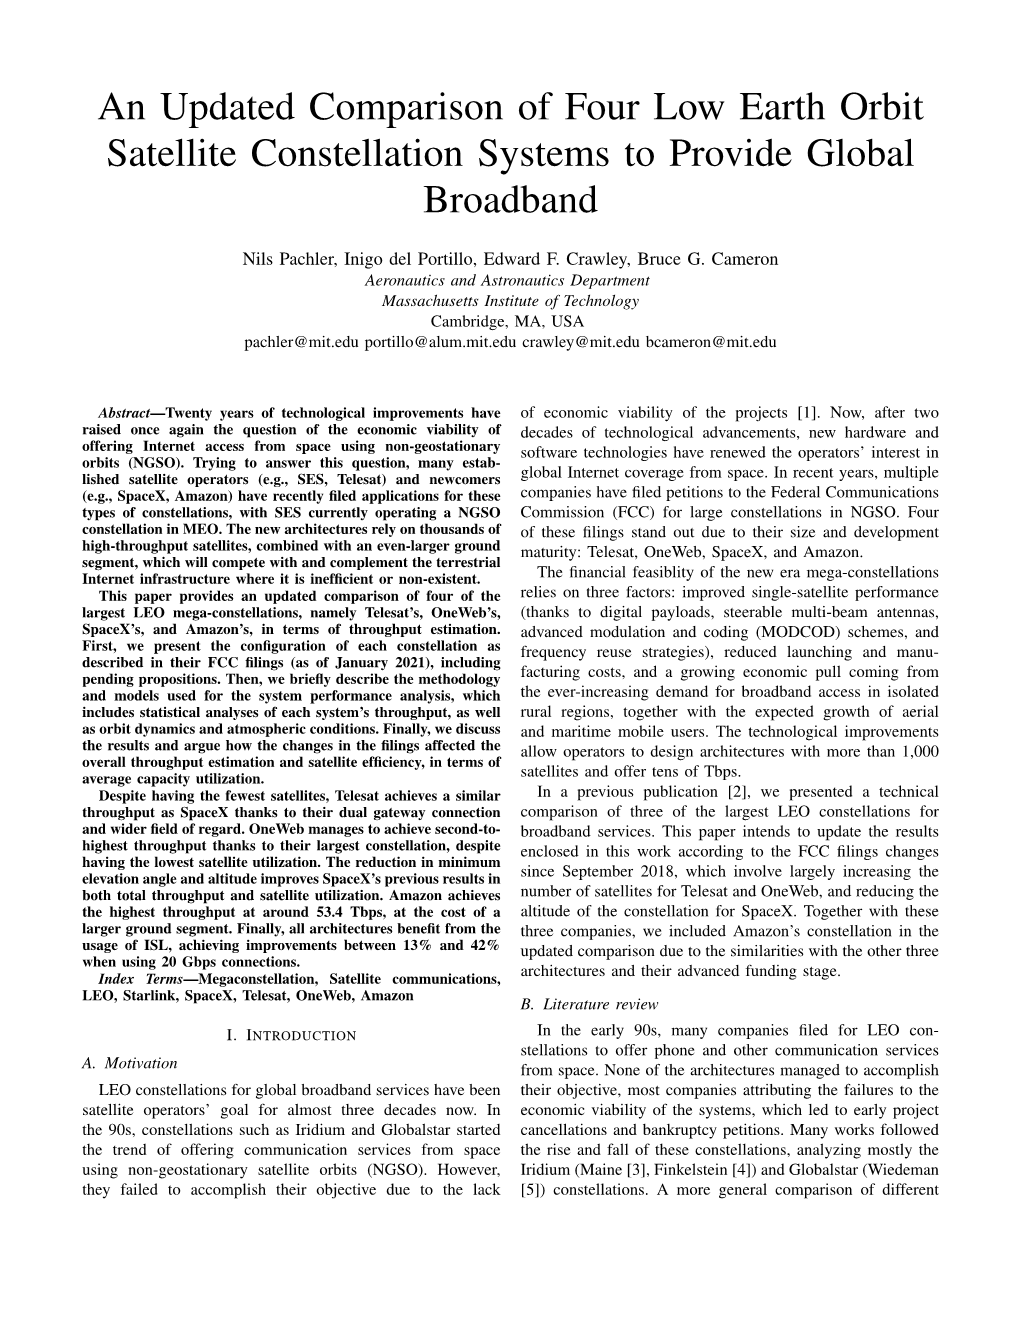 An Updated Comparison of Four Low Earth Orbit Satellite Constellation Systems to Provide Global Broadband